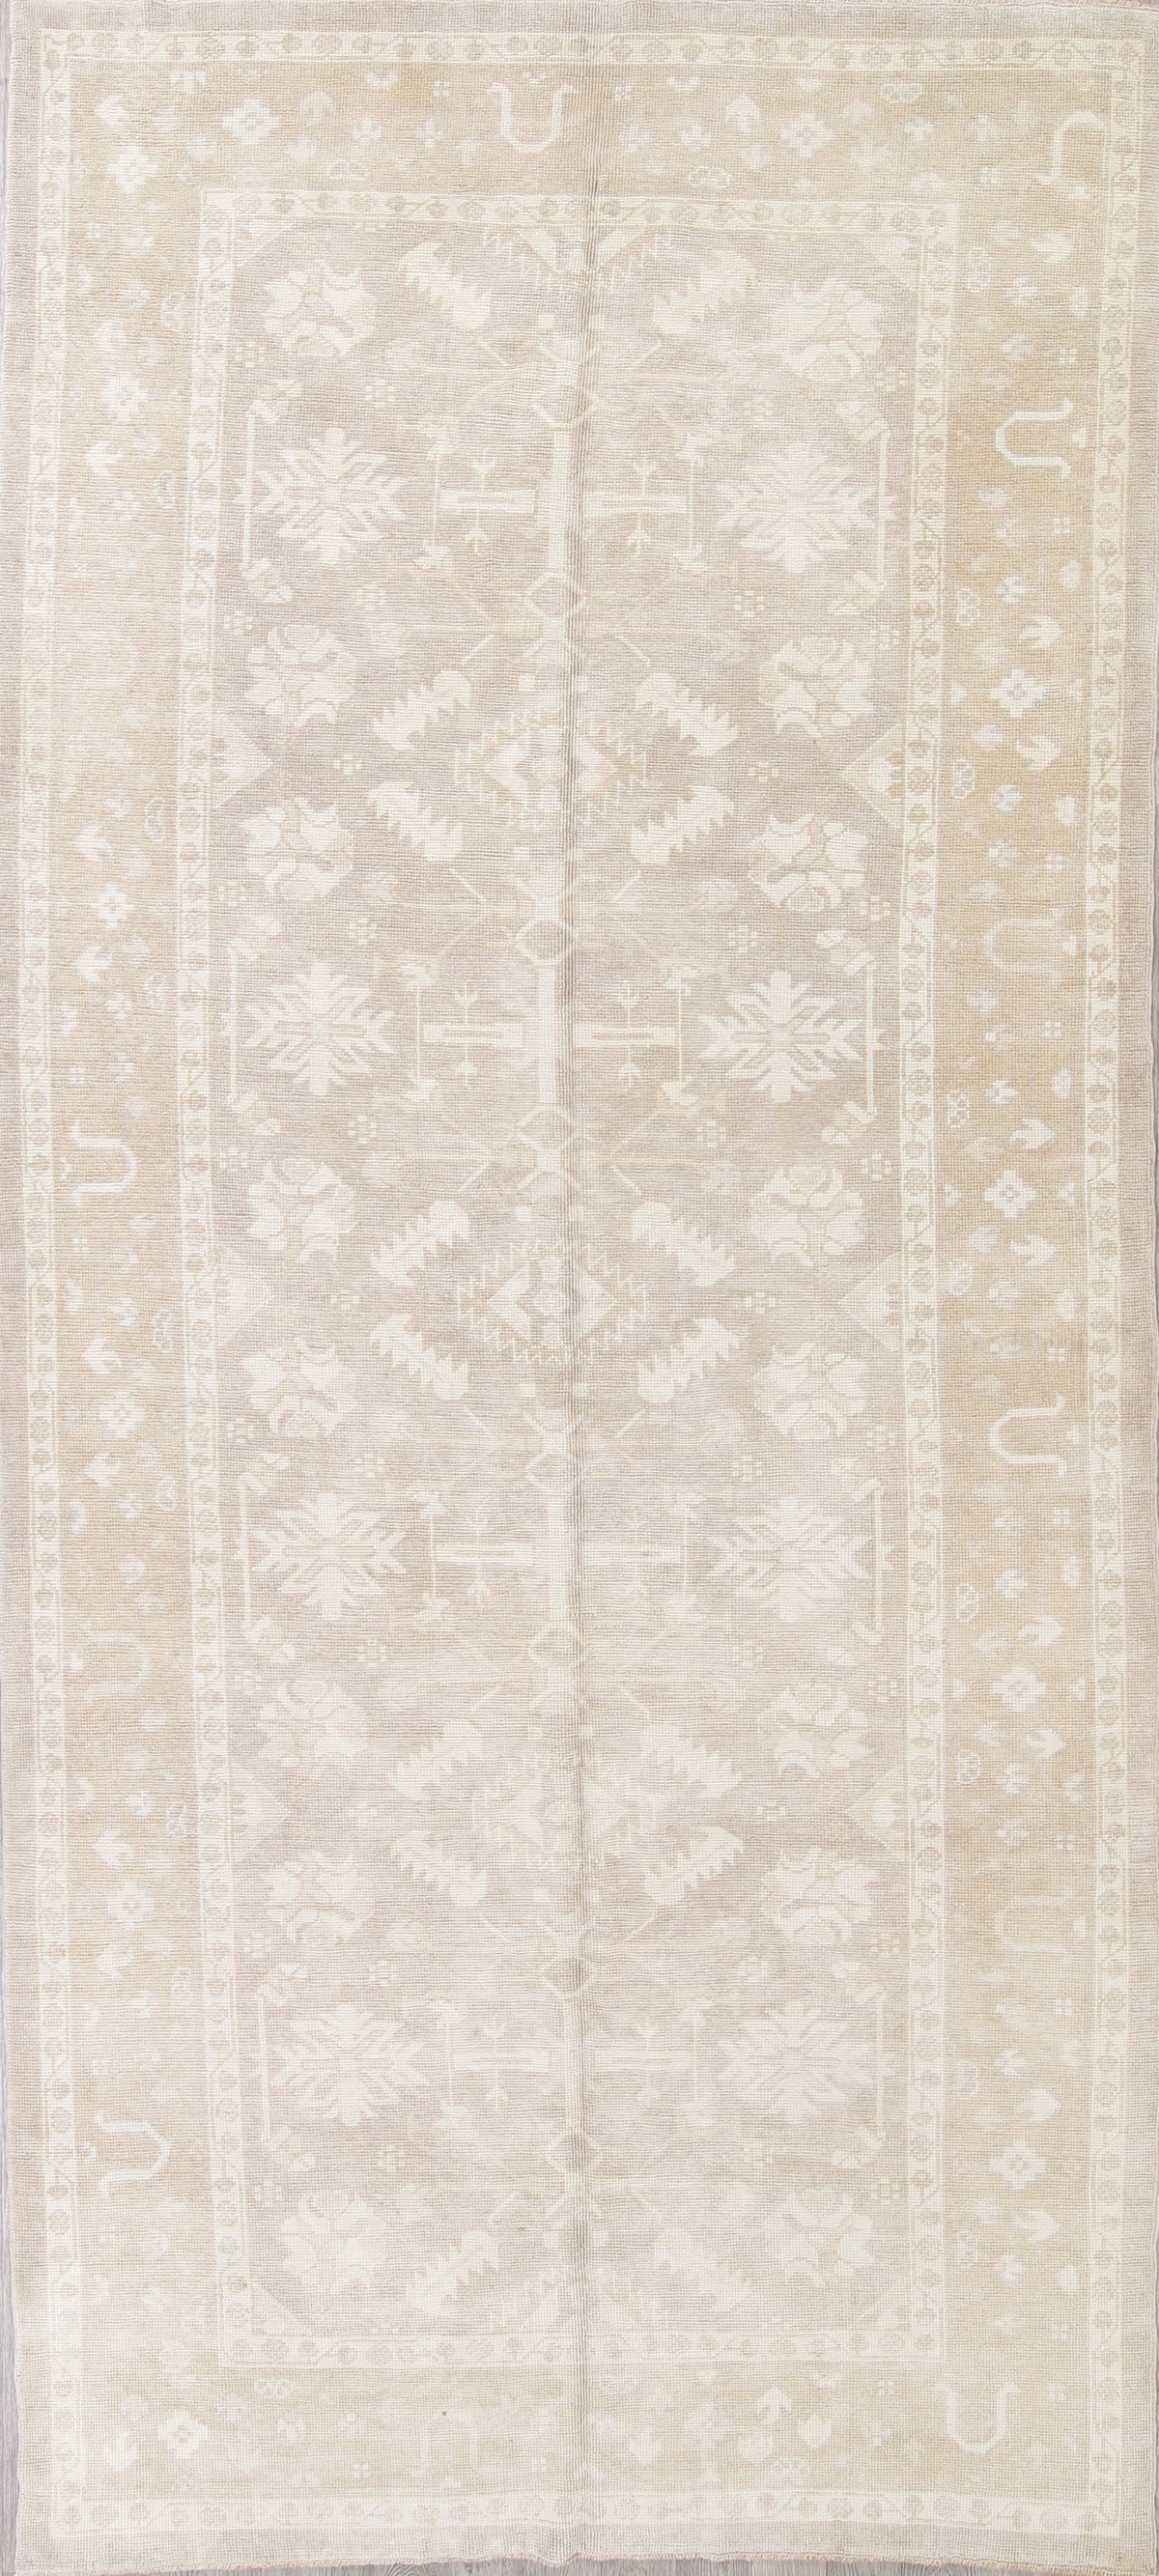 Vegetable Dye Muted Tan Oushak Turkish Hand-Knotted Runner Rug 7x16